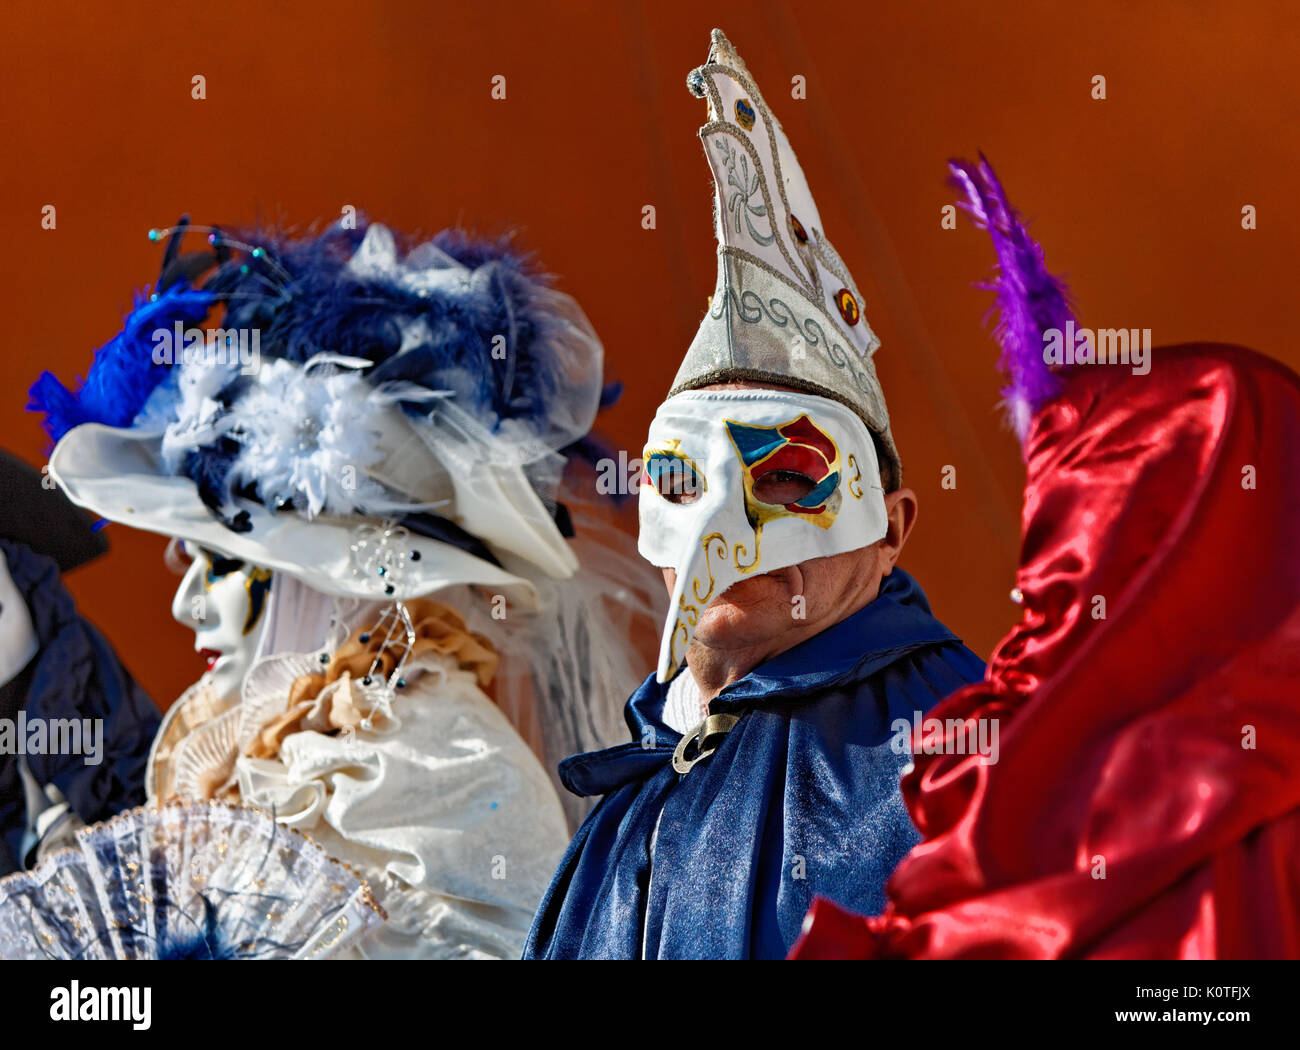 Venice,Italy,February 26th 2011: Three people in Venetian disguises during the Venice Carnival. Selective focus on the long nose masks in the center. Stock Photo